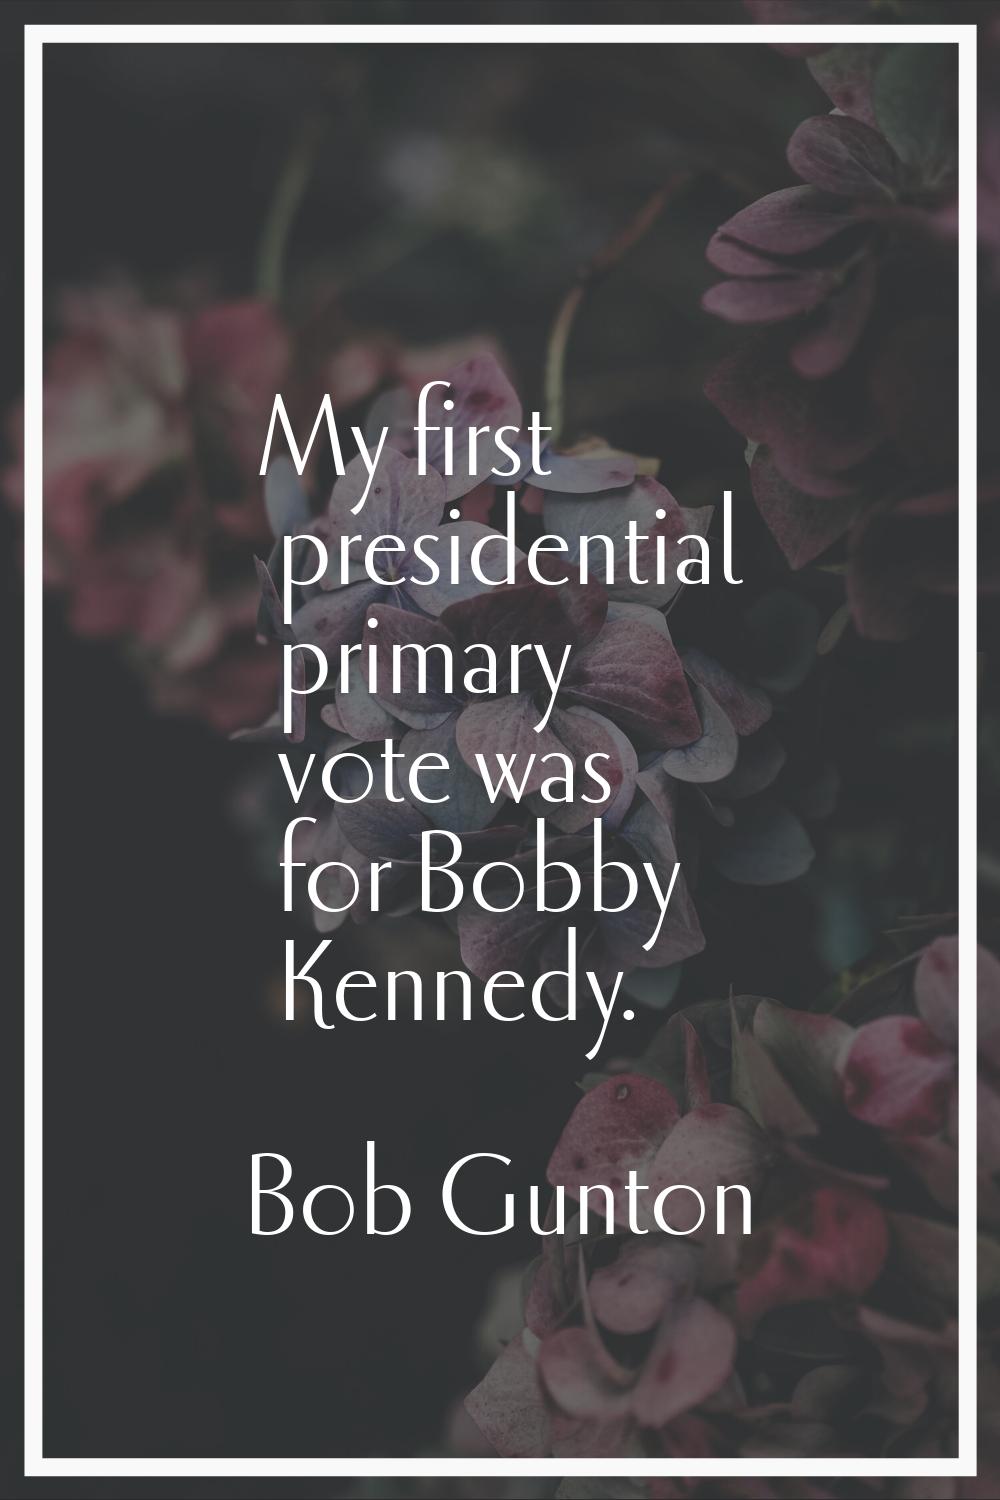 My first presidential primary vote was for Bobby Kennedy.